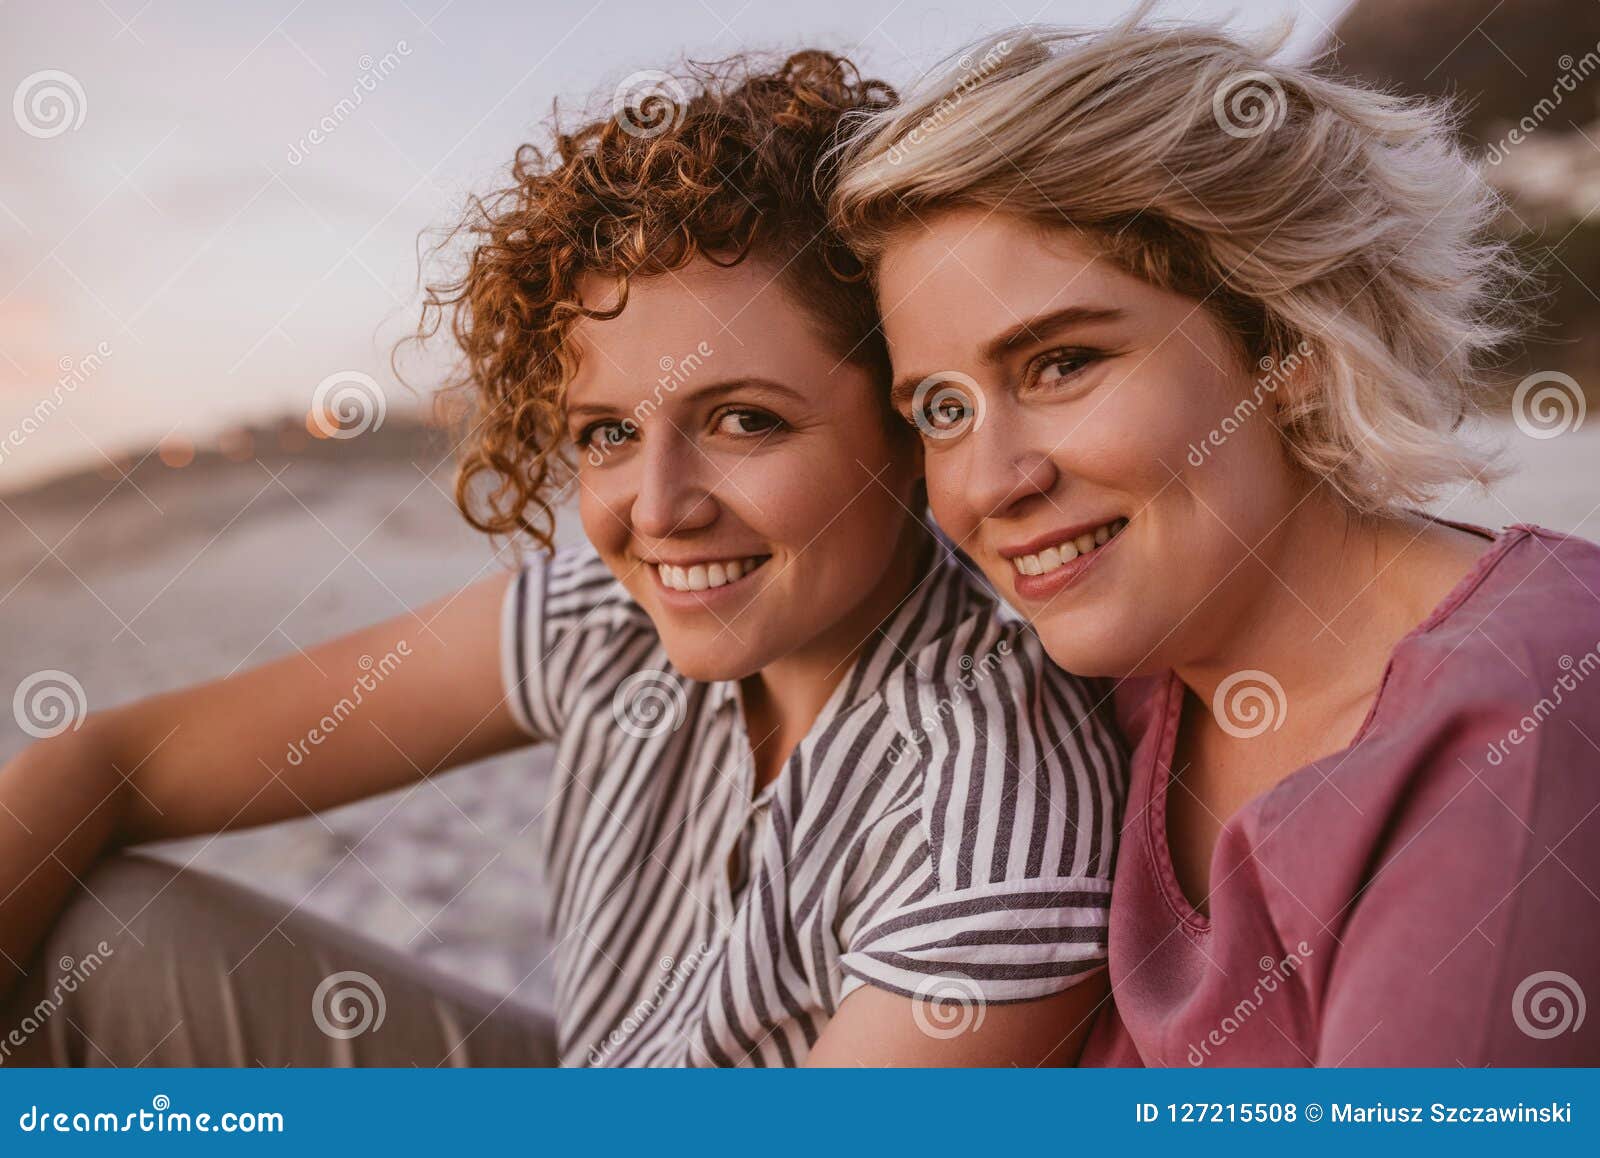 Smiling Young Lesbian Couple Enjoying A Romantic Beach Sunset Together